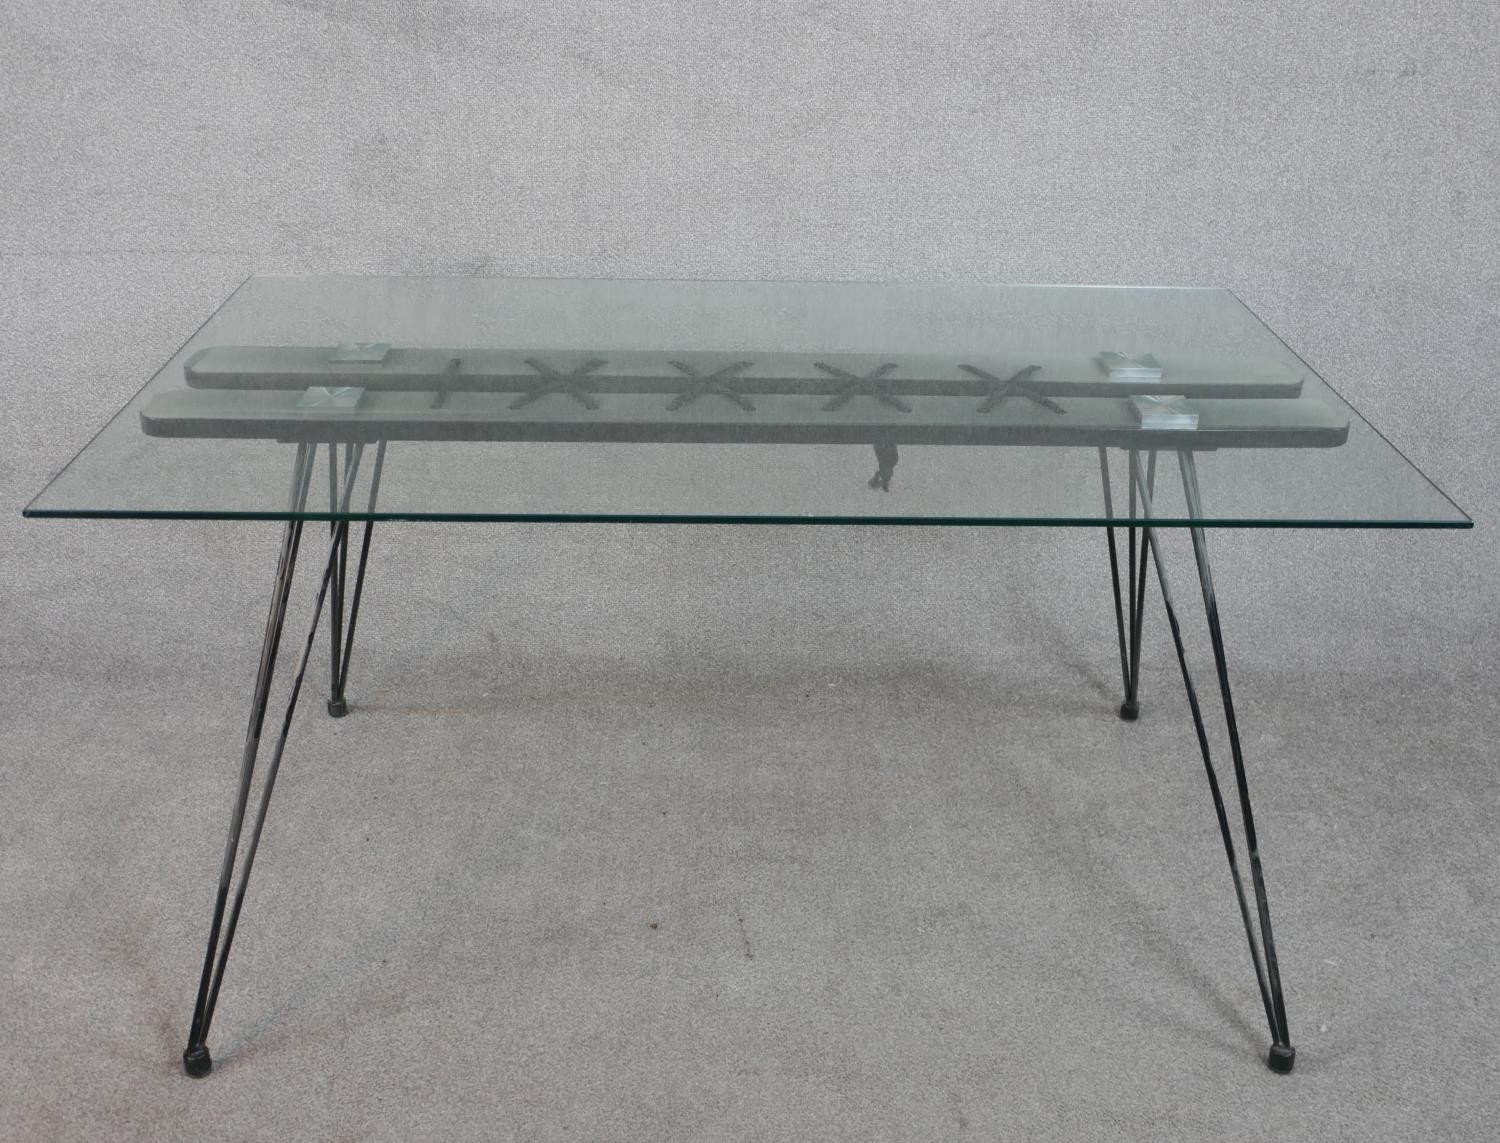 A 20th century dining table, with a rectangular plate glass top, the base woven together with rope